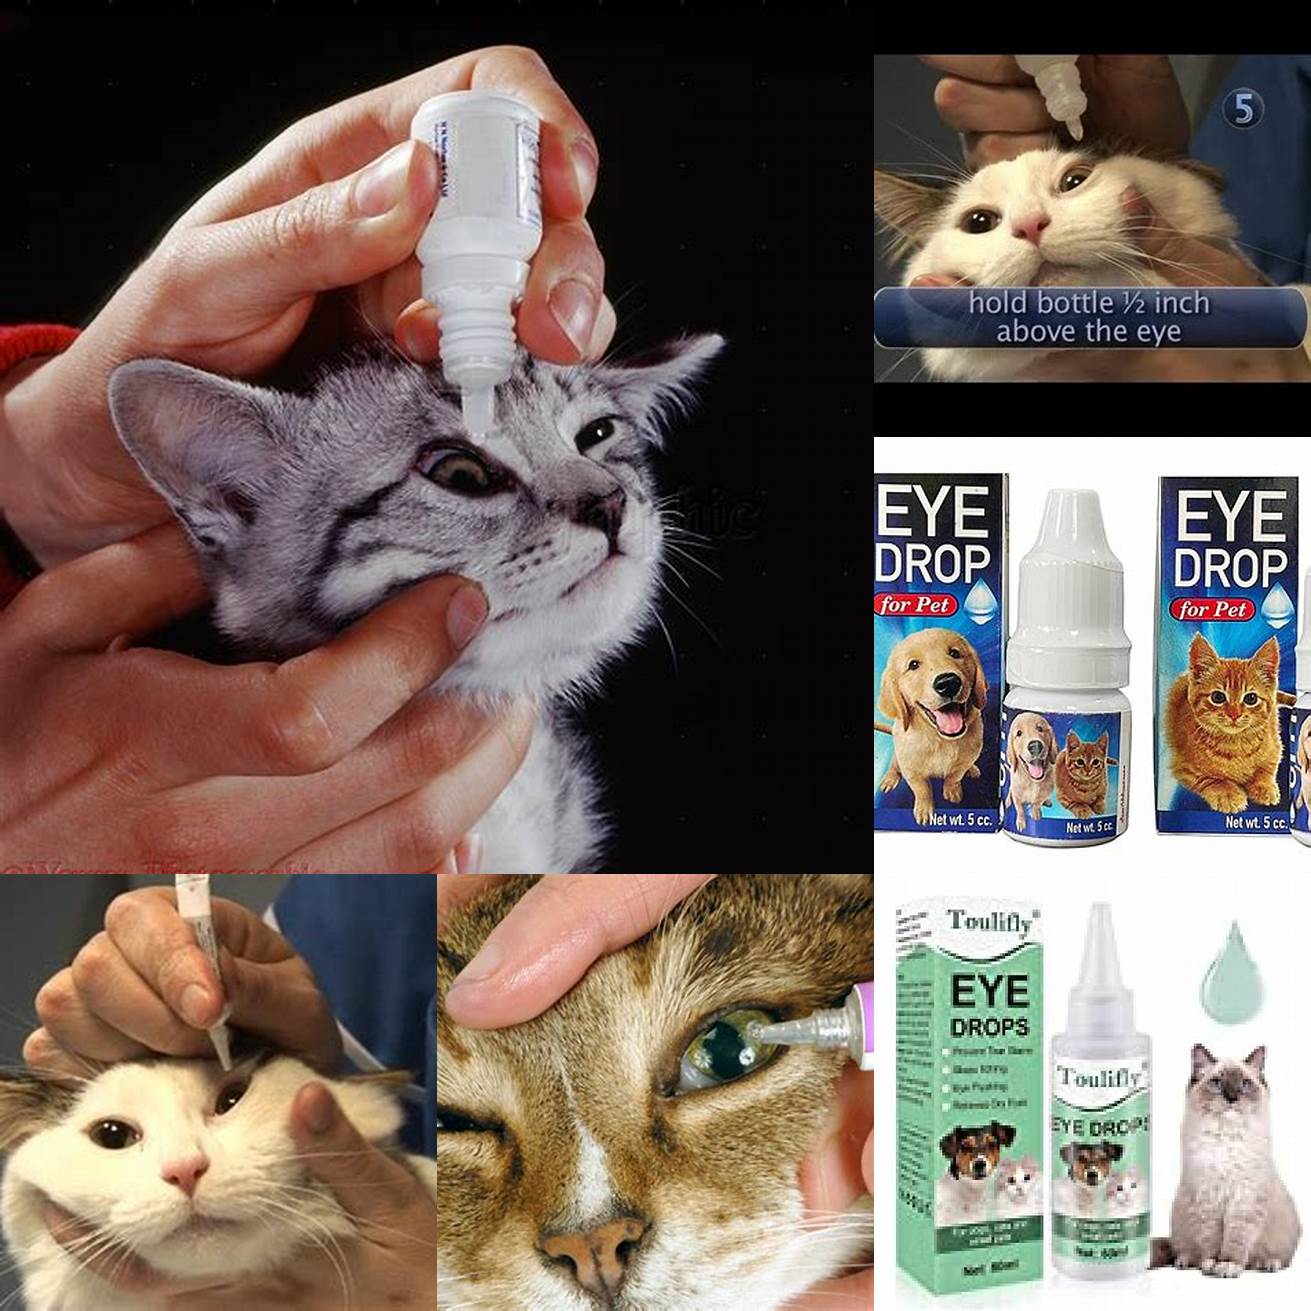 1 Follow the instructions that come with your eye drops